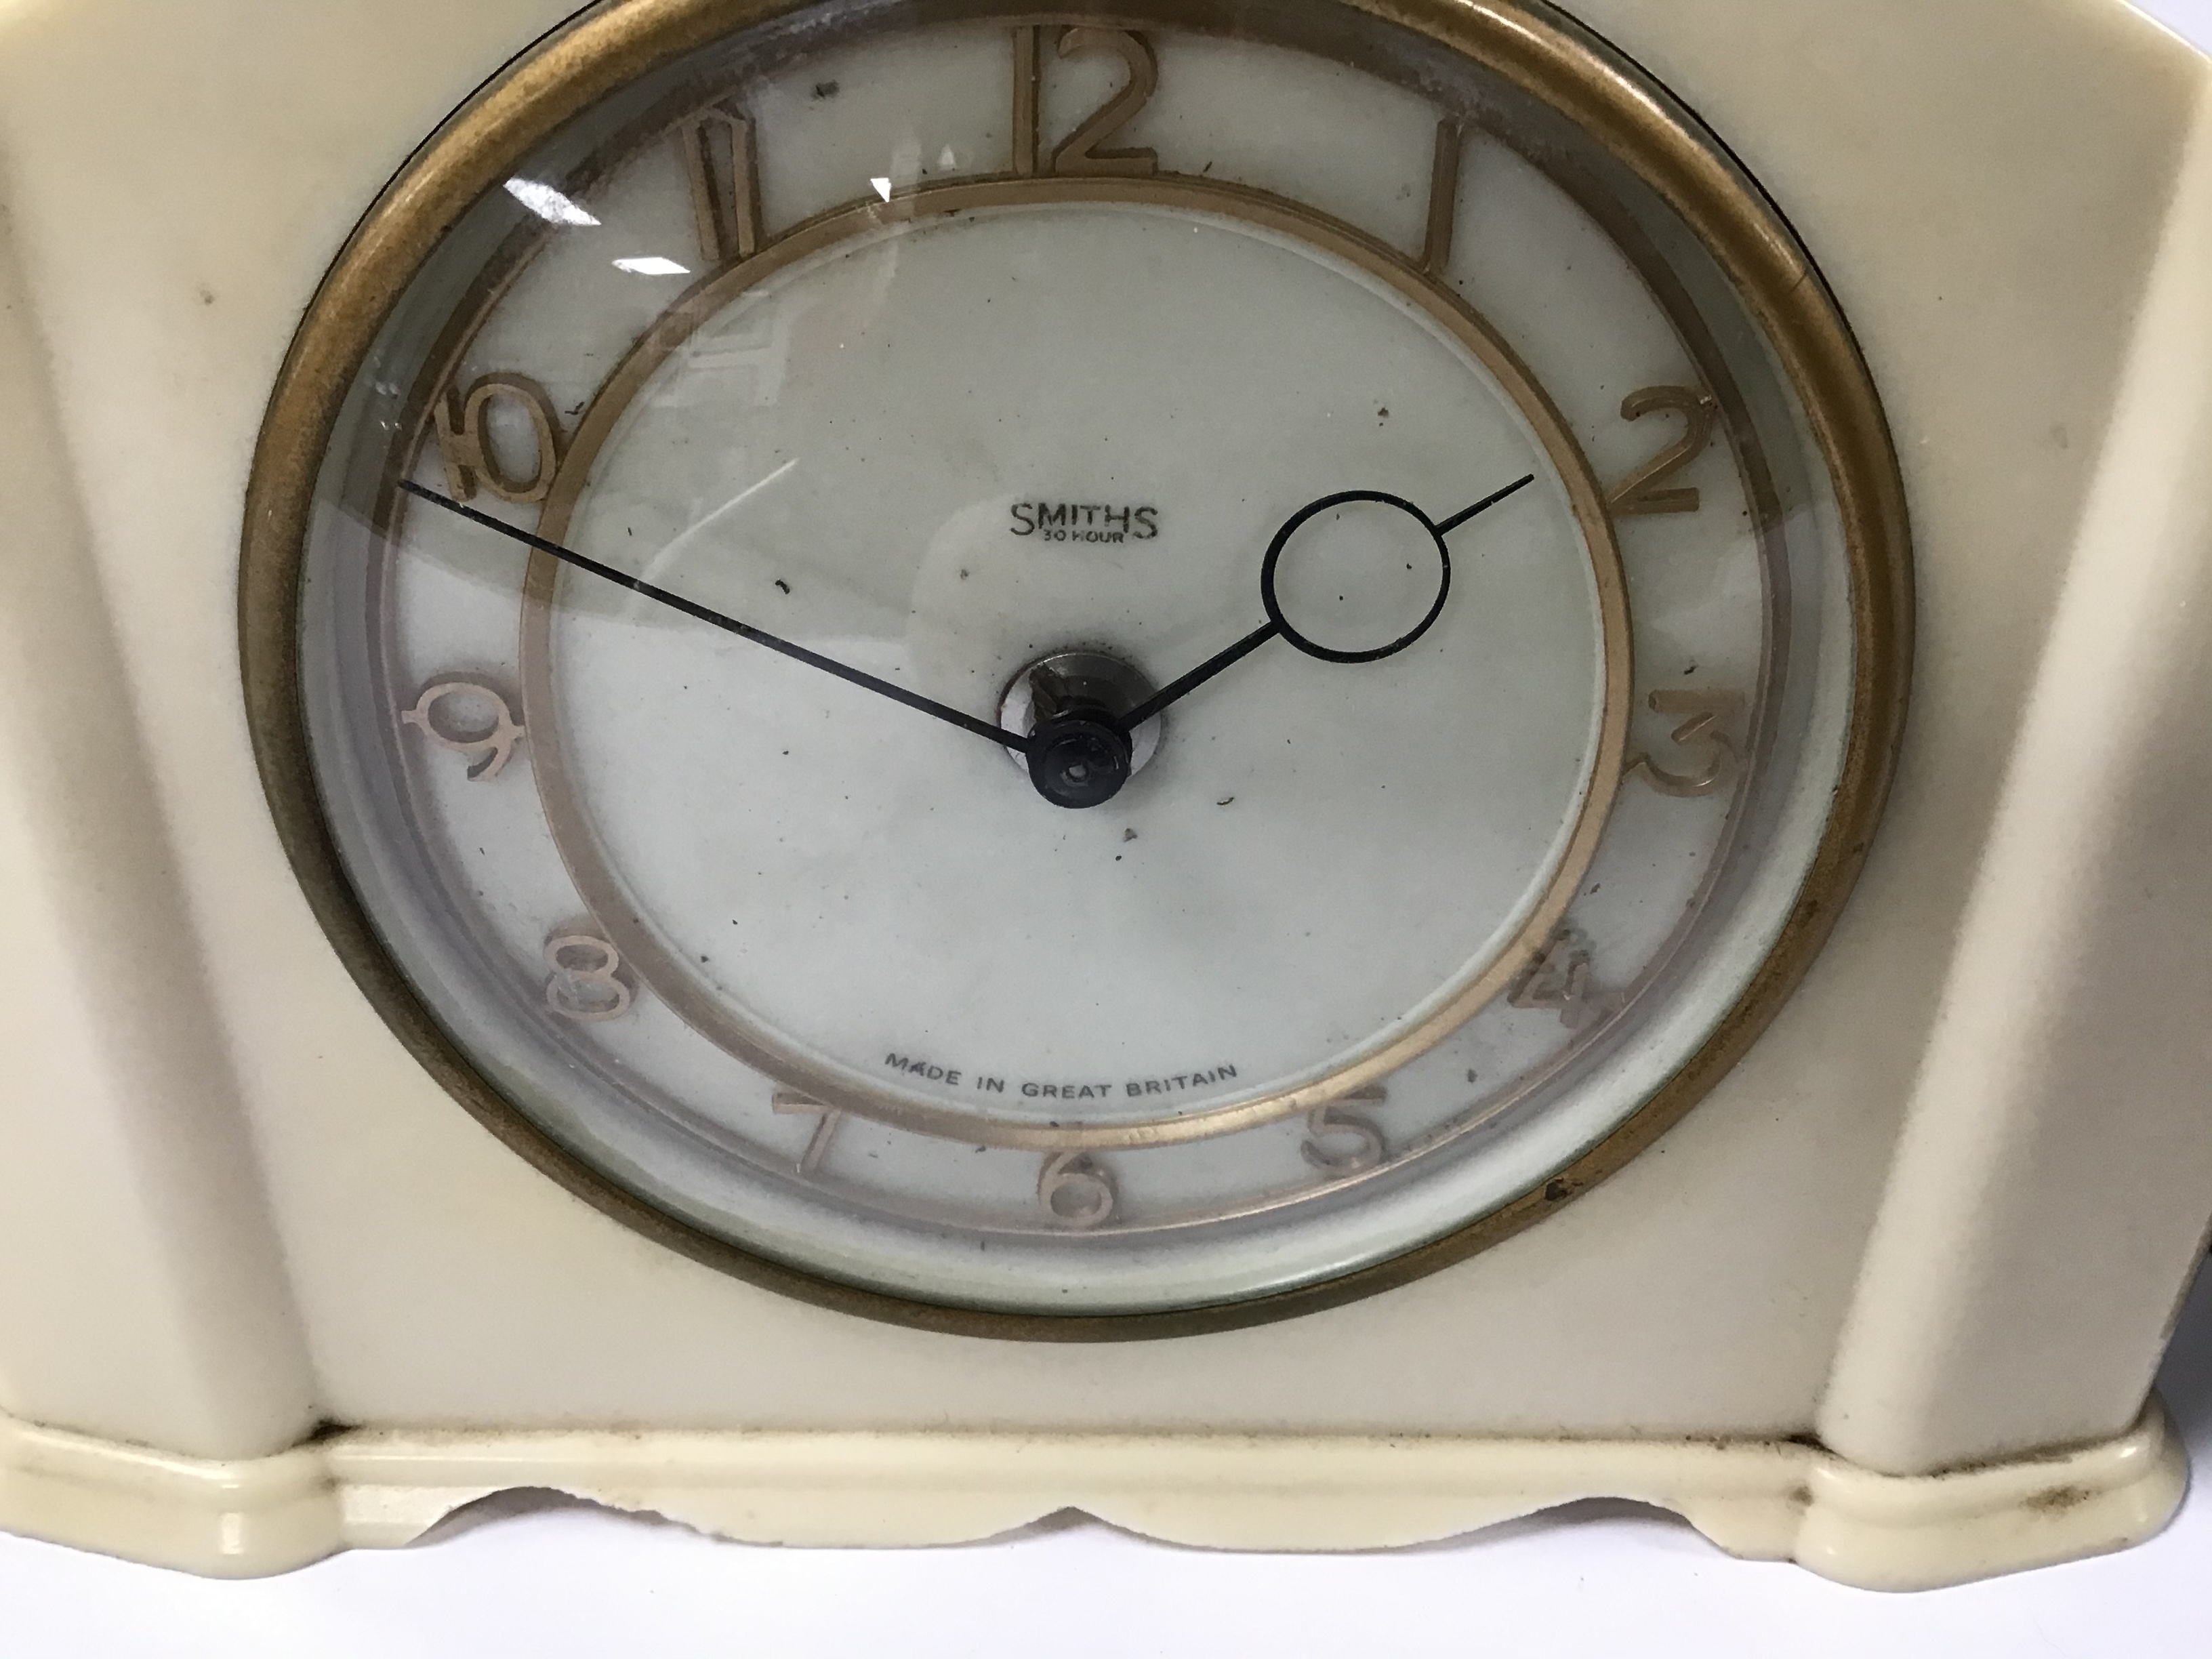 TWO ART DECO BAKELITE MANTLE CLOCKS, BOTH BY SMITHS, LARGEST 19.5CM WIDE - Image 3 of 4